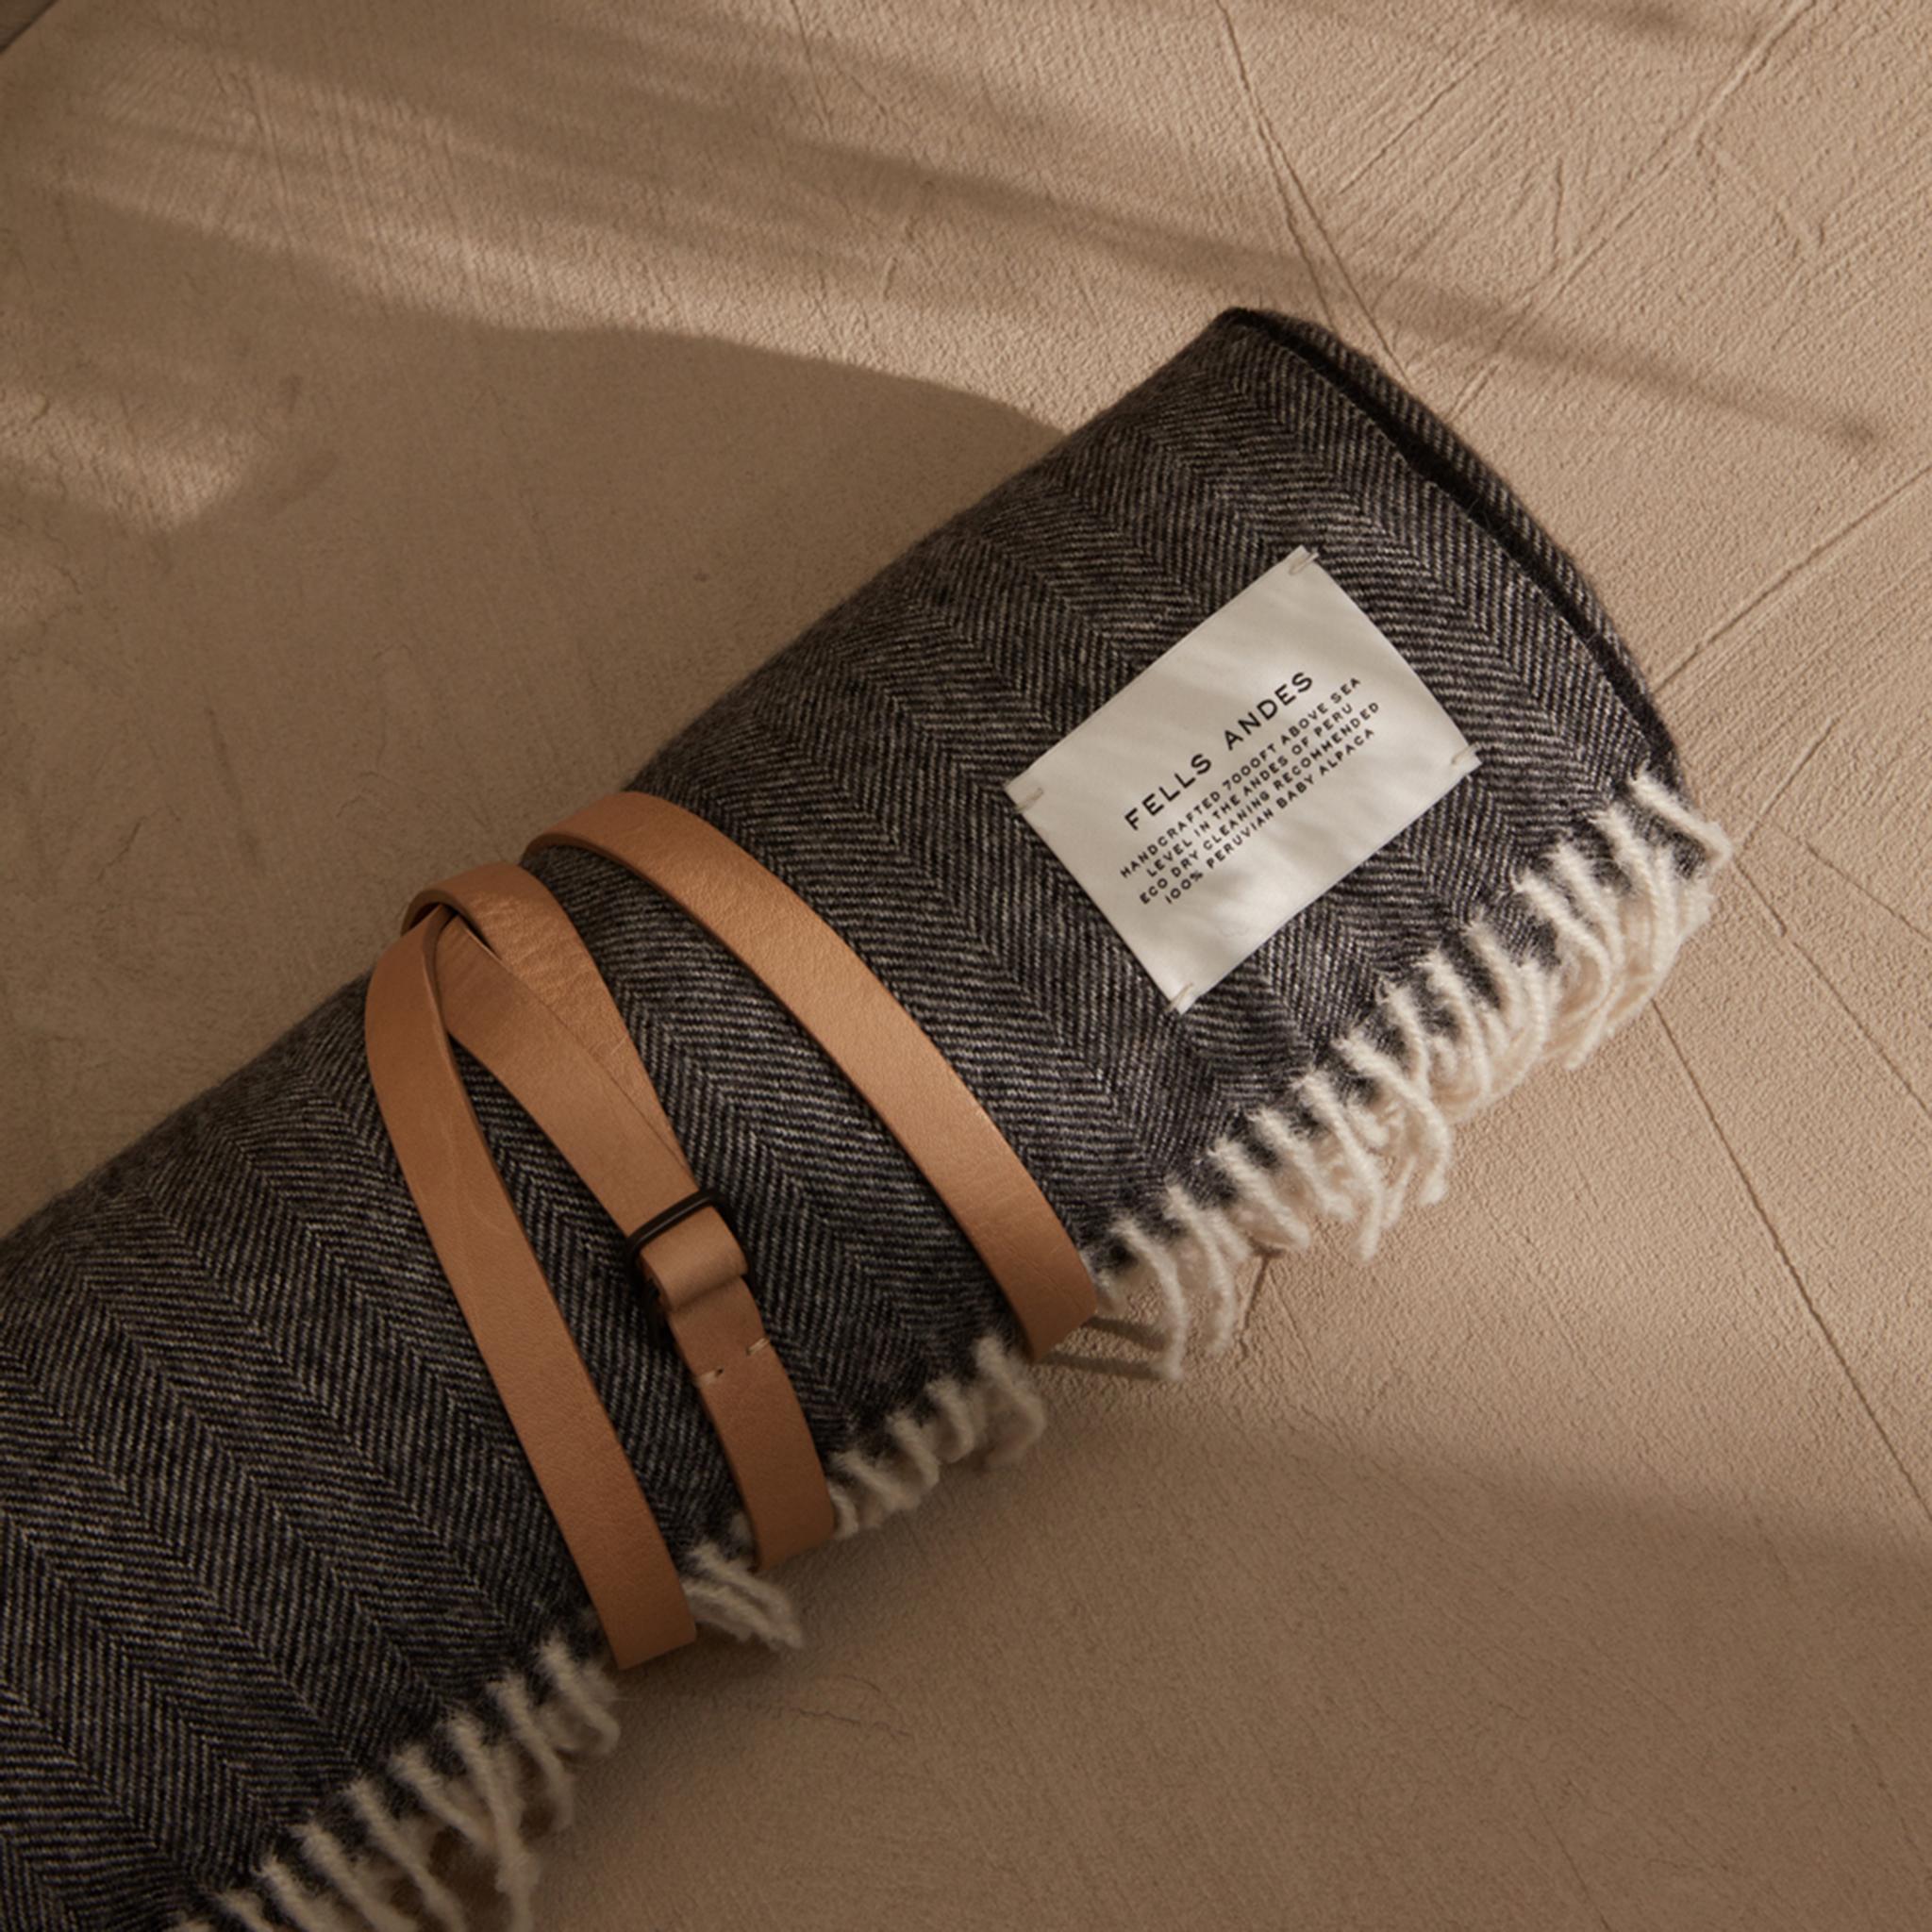 ABOUT

The Sill throw by Fells Andes is designed in San Francisco and handmade in the Andes, supporting local culture and craft.

Made from 100% Royal Baby Alpaca – one of the finest, most luxurious materials in the world – it is extremely soft